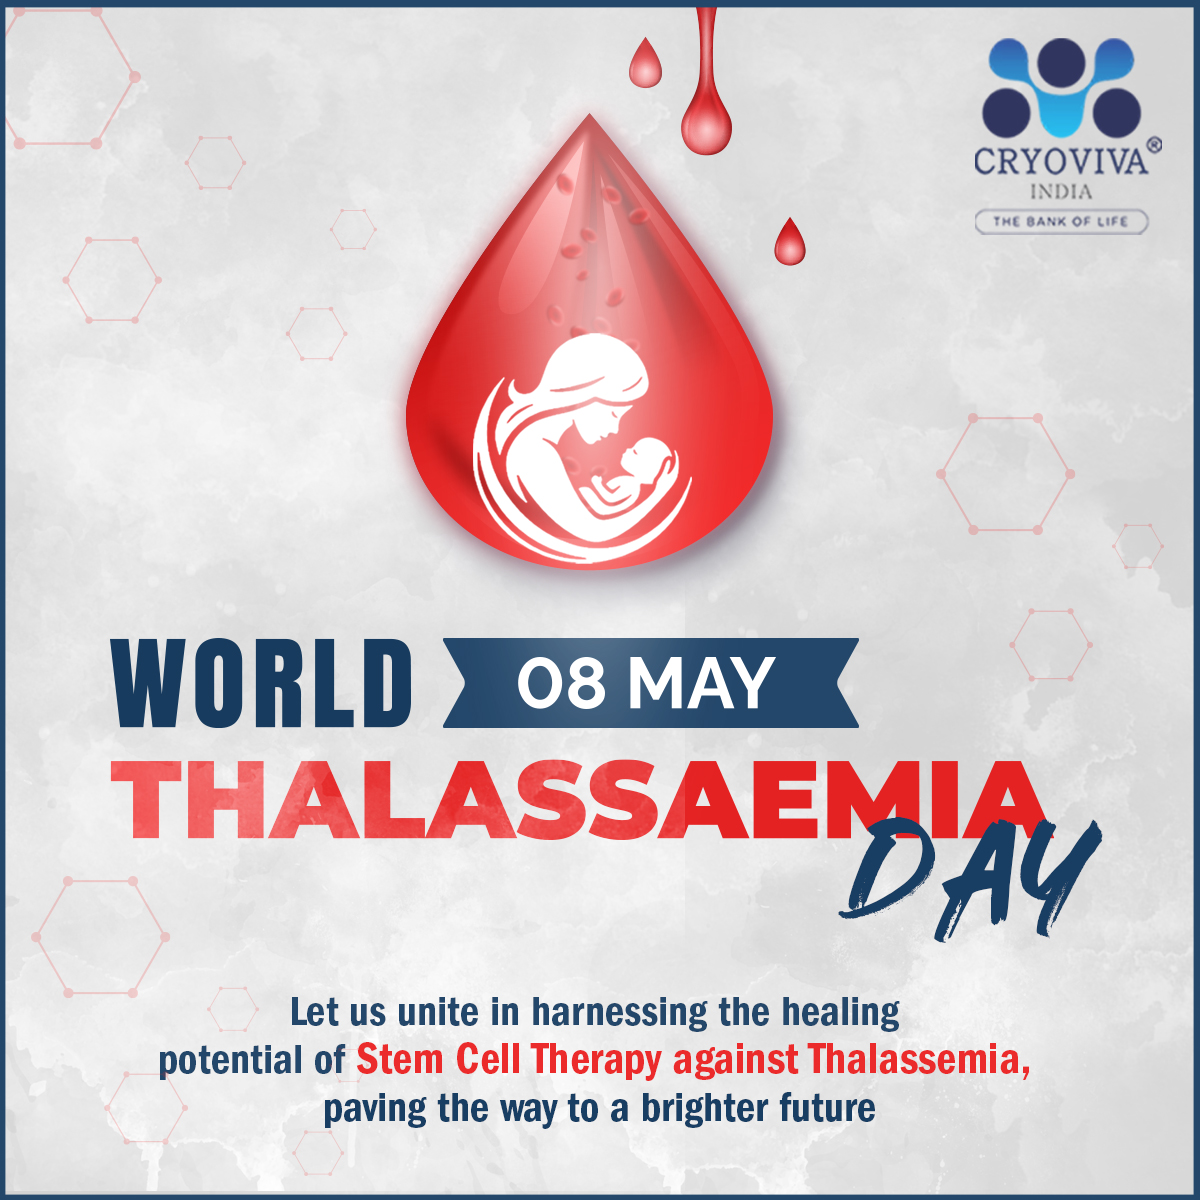 World Thalassemia Day, observed on May 8th. on this day, let's unite to raise awareness about this genetic #blooddisorder and the hope that #stemcelltherapy brings to those affected.

#WorldThalassemiaDay #8May #thalassemiaawareness #FightThalassemia #geneticblooddisorder